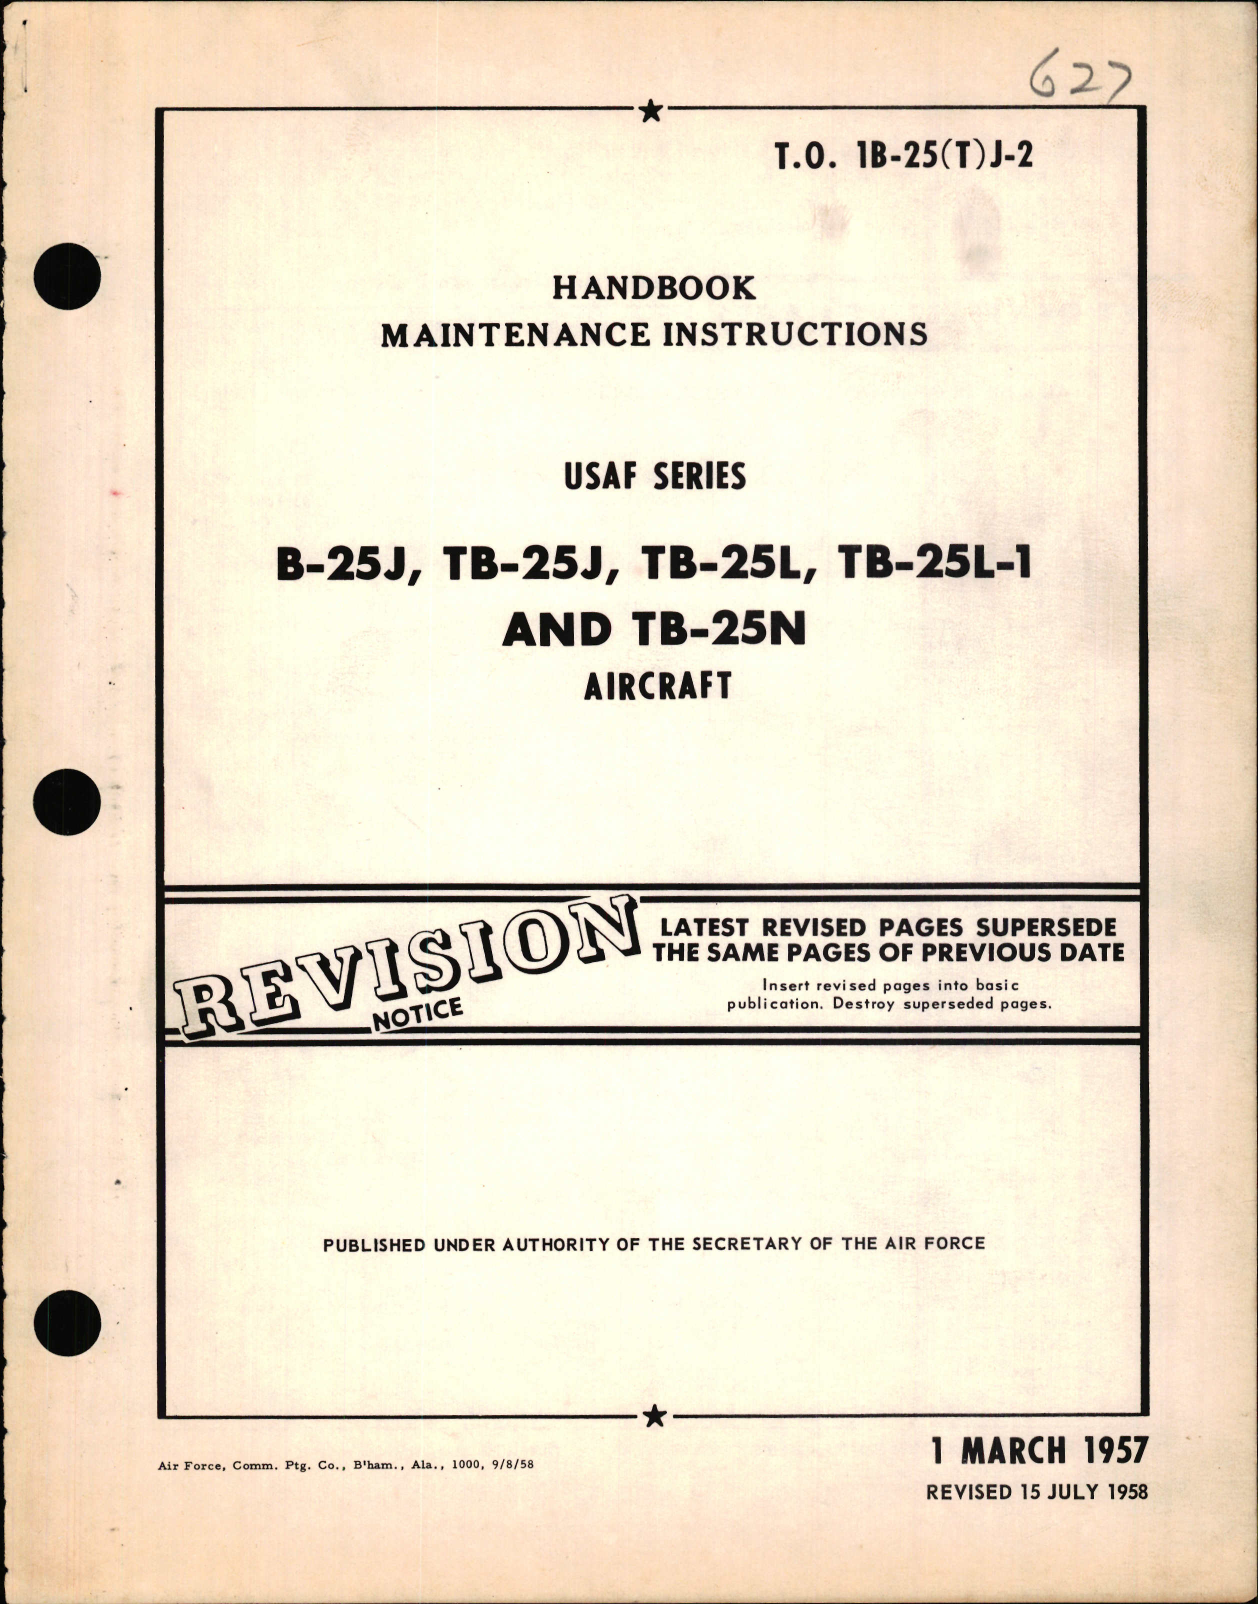 Sample page 1 from AirCorps Library document: Maintenance Instructions for B-25J, B-25L, and B-25N